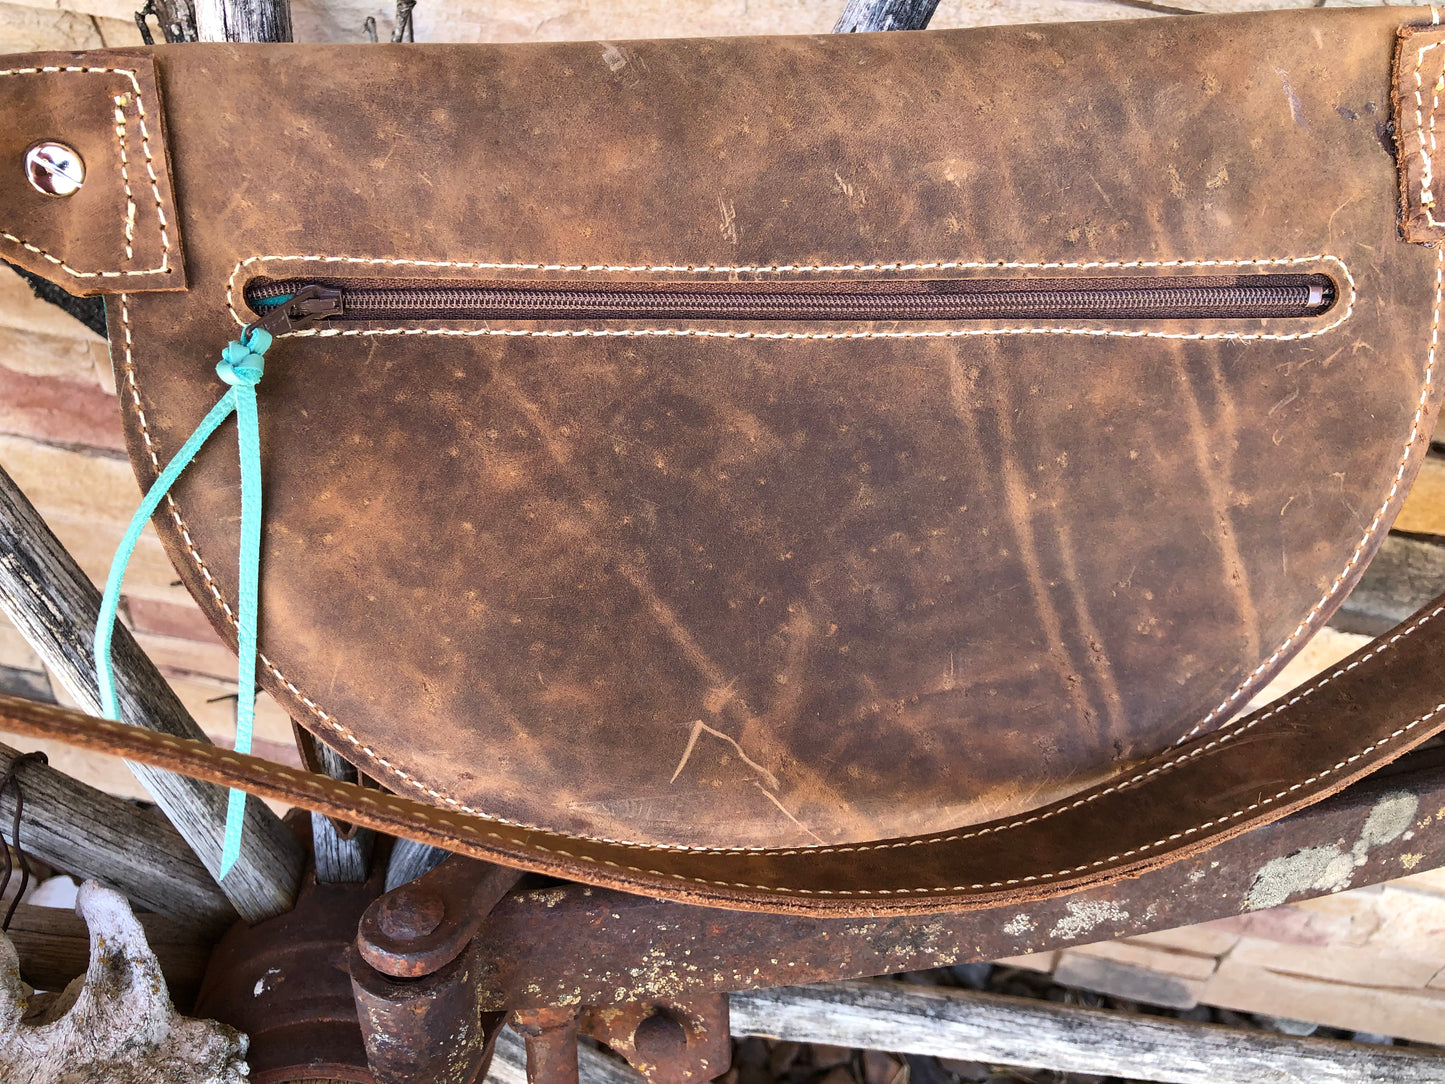 Western tooled leather Wild like the West Fanny pack Bum bag